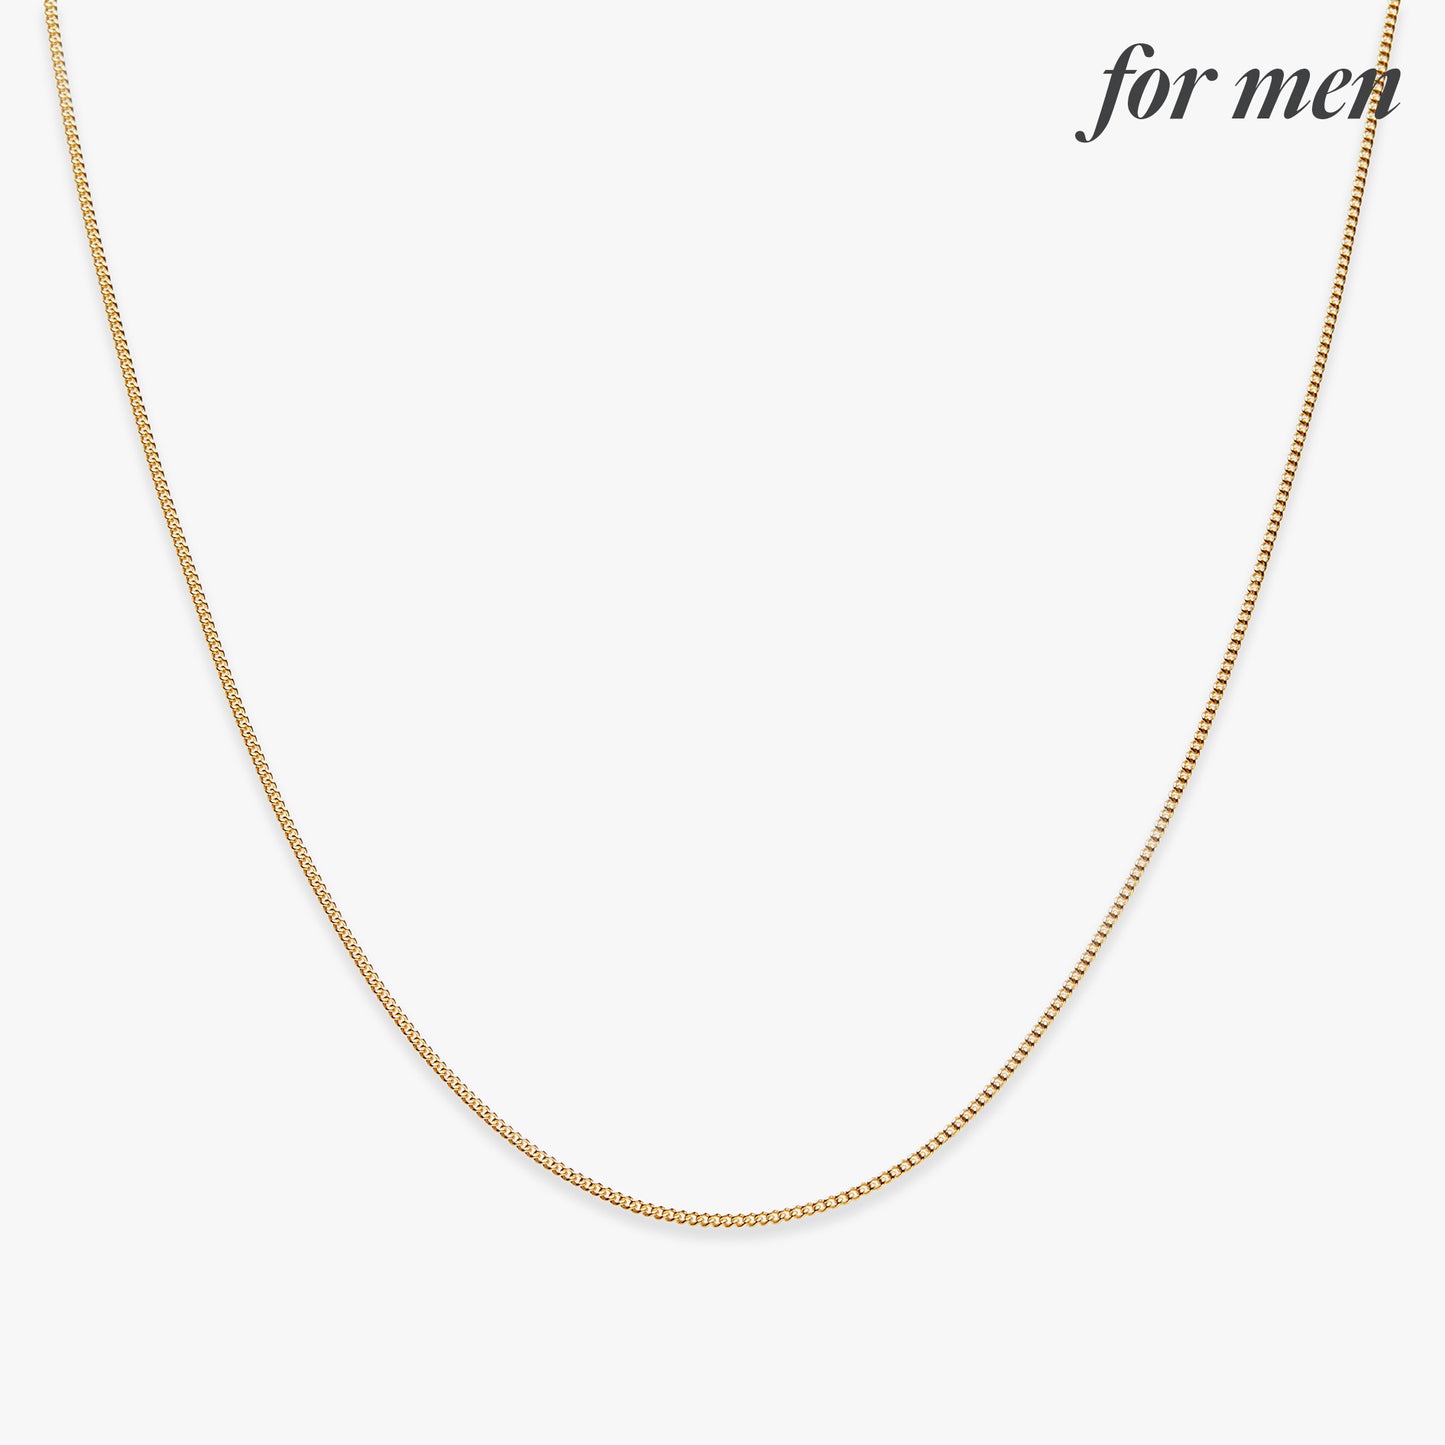 Basic curb chain necklace gold filled for men